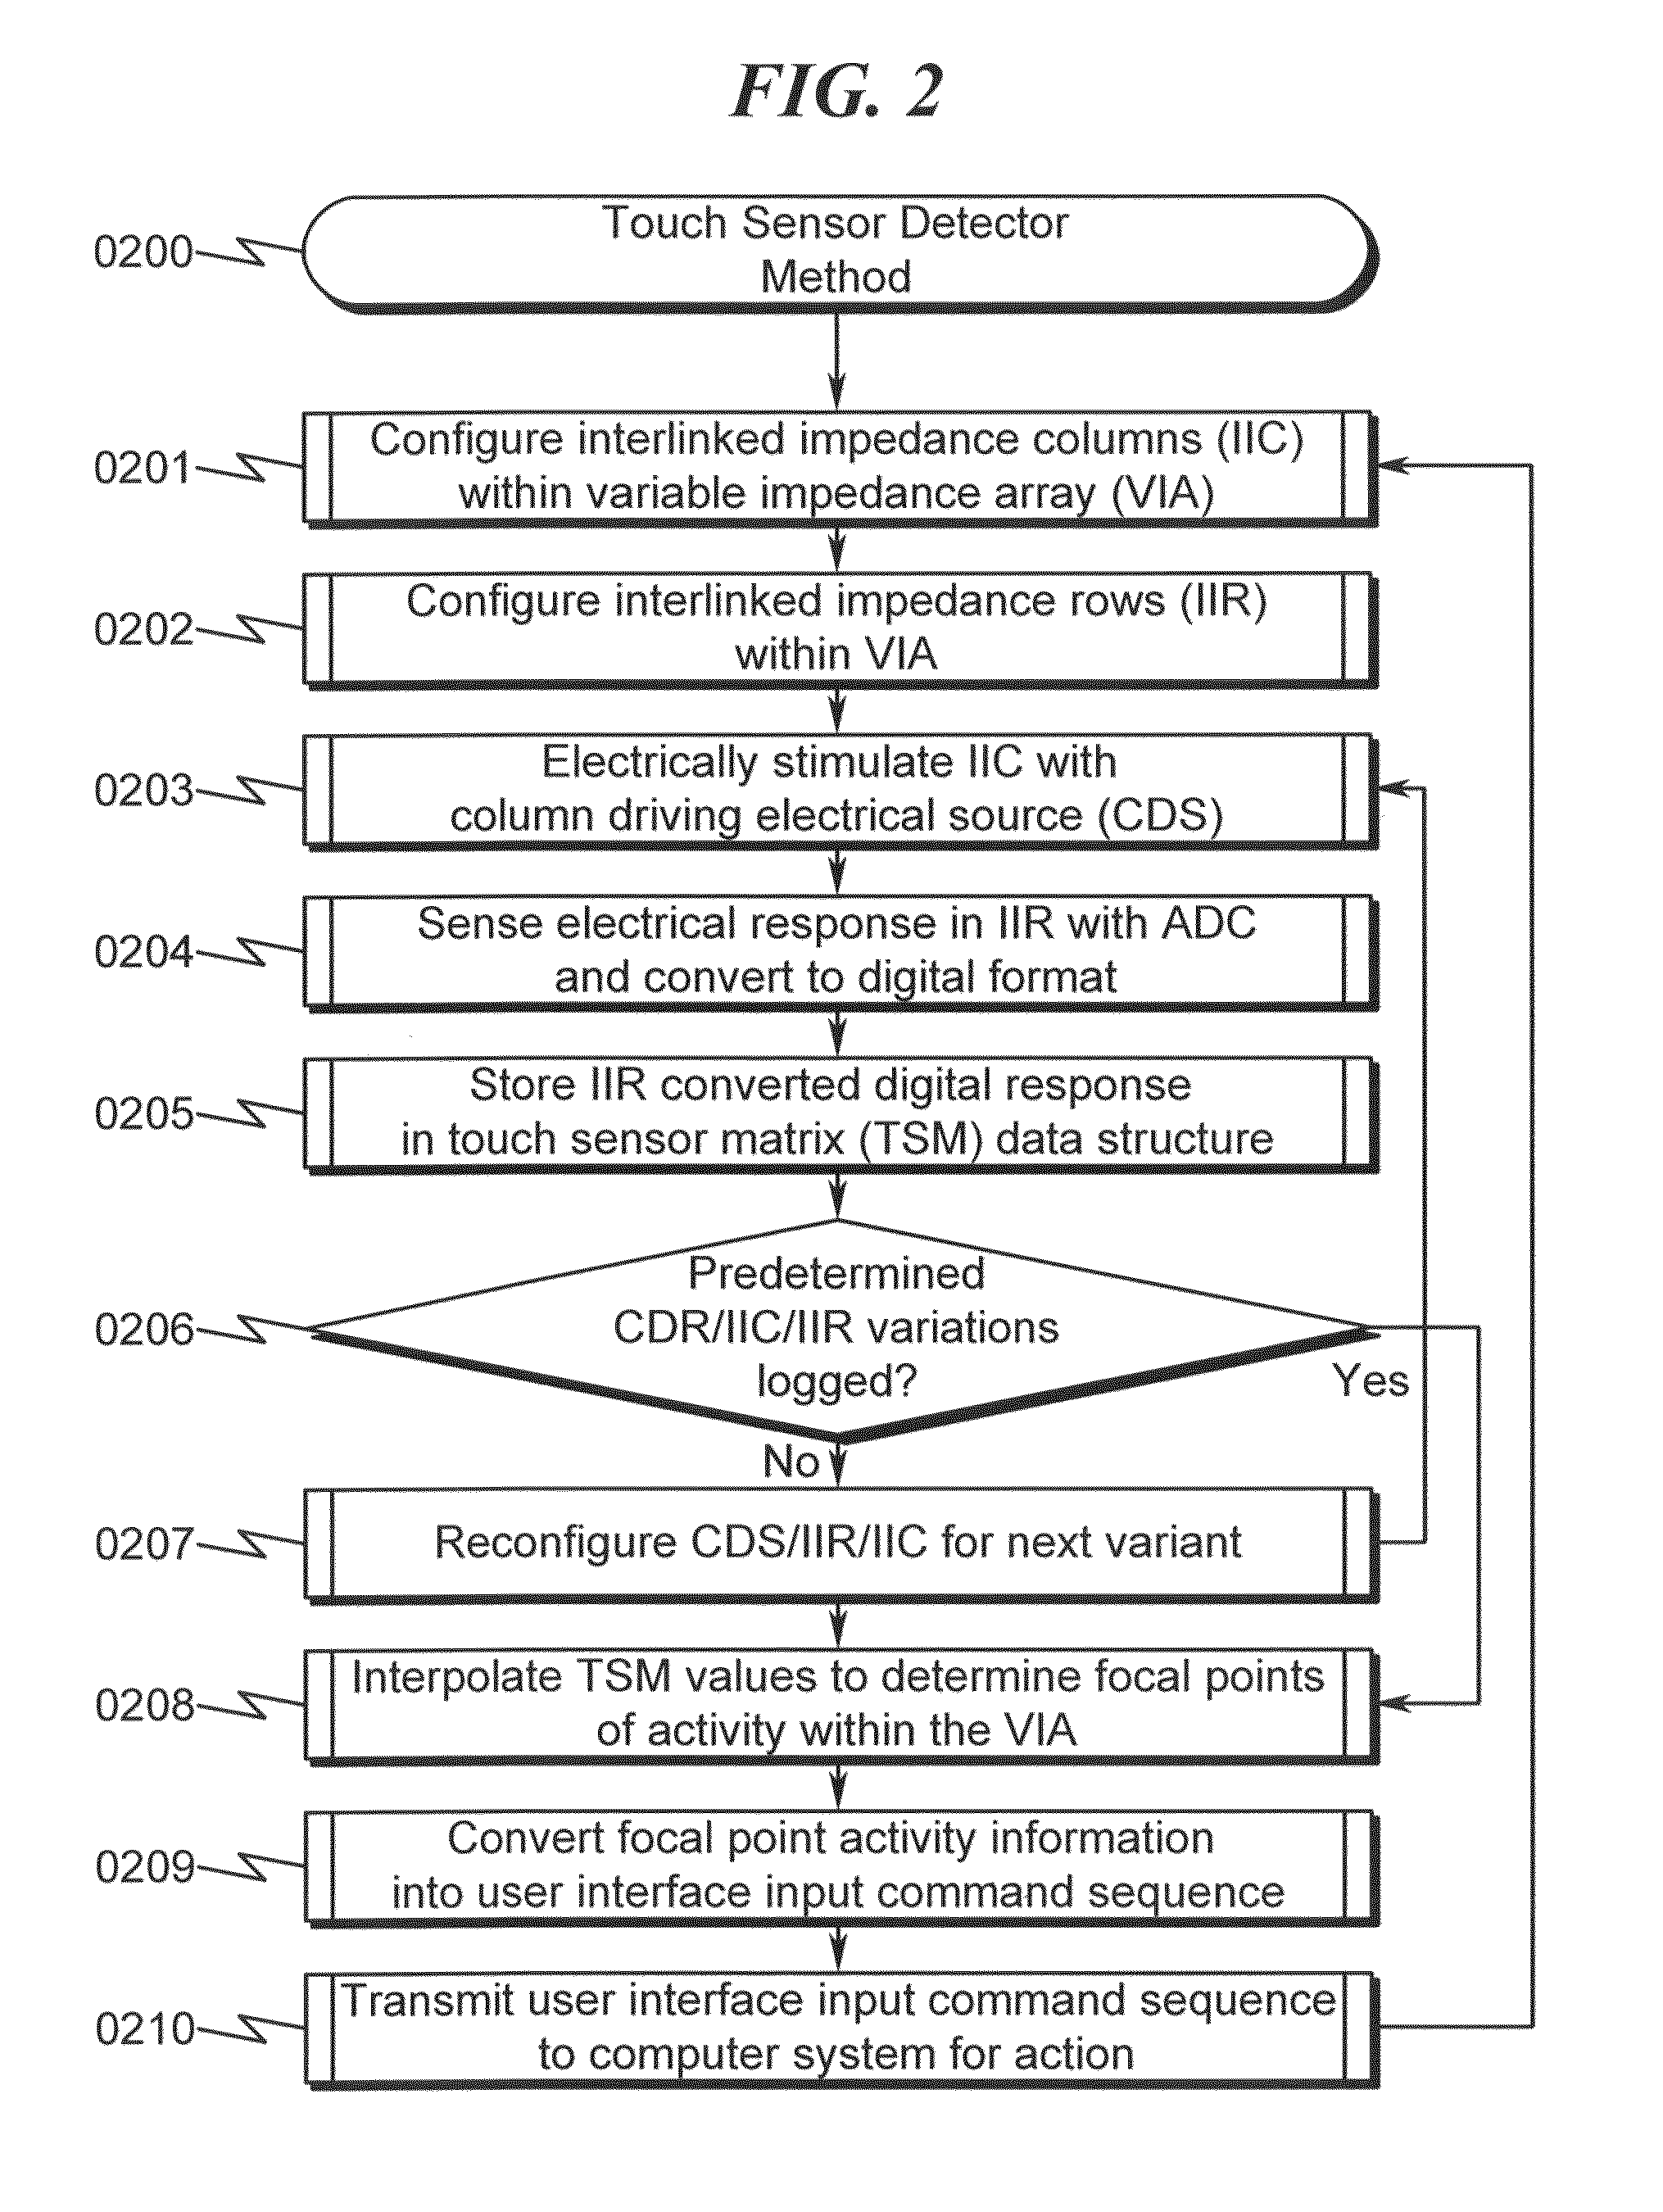 Touch sensor detector system and method